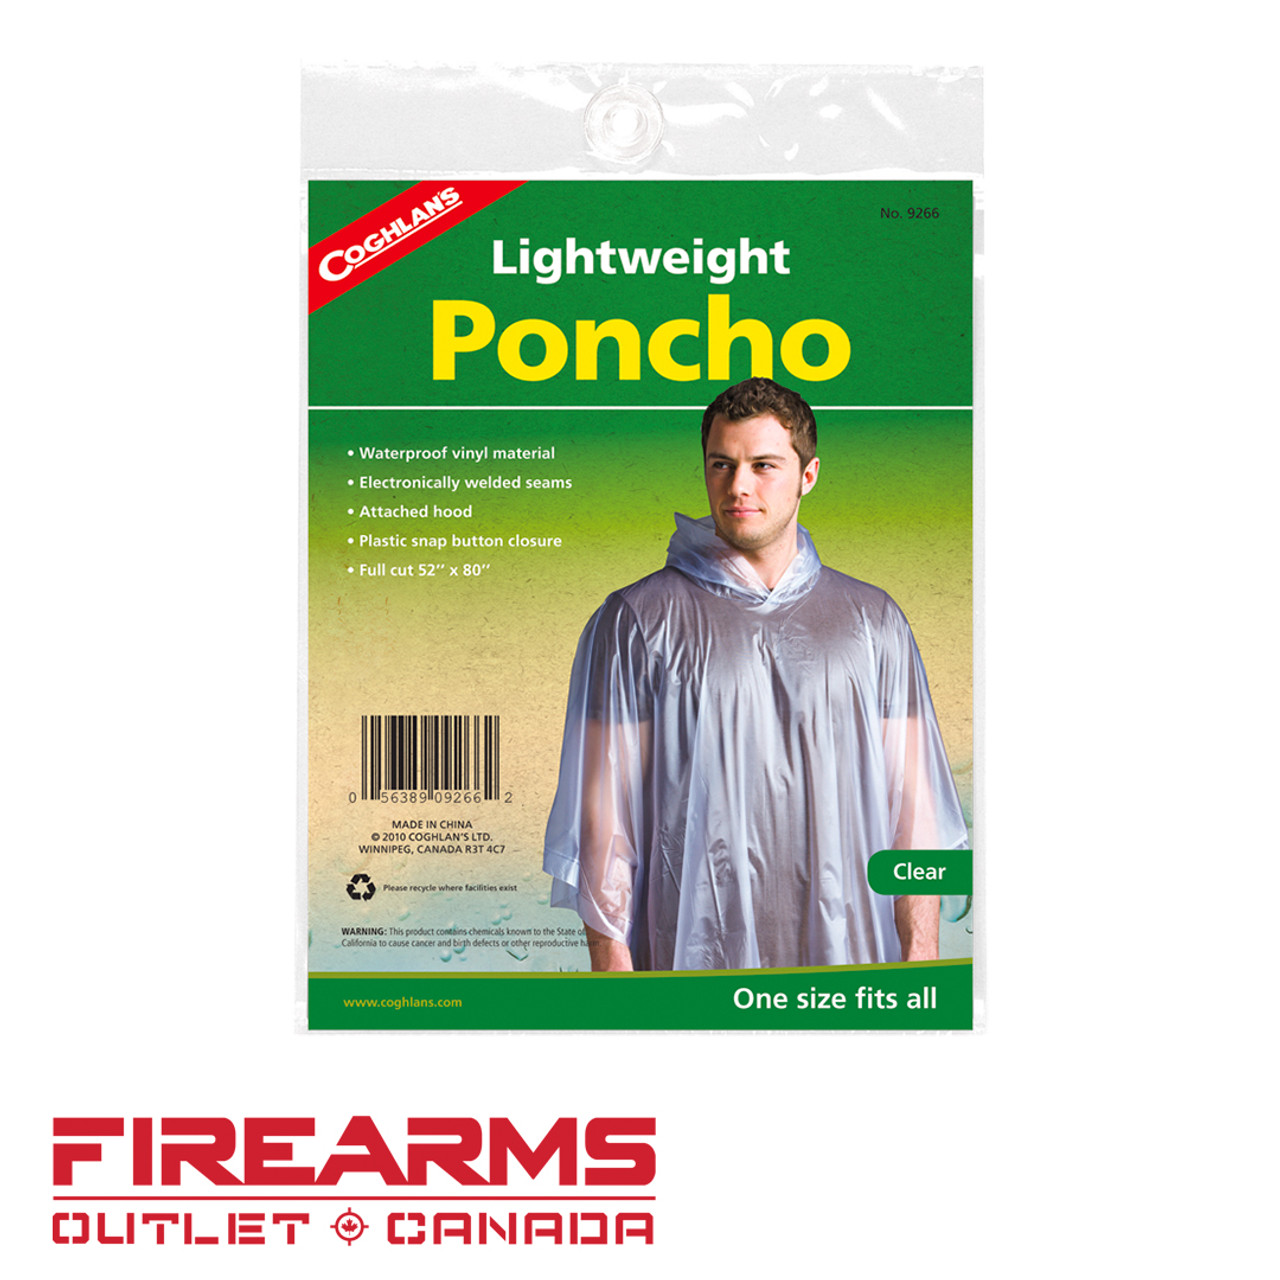 Coghlan's Lightweight Poncho - Clear [9266]